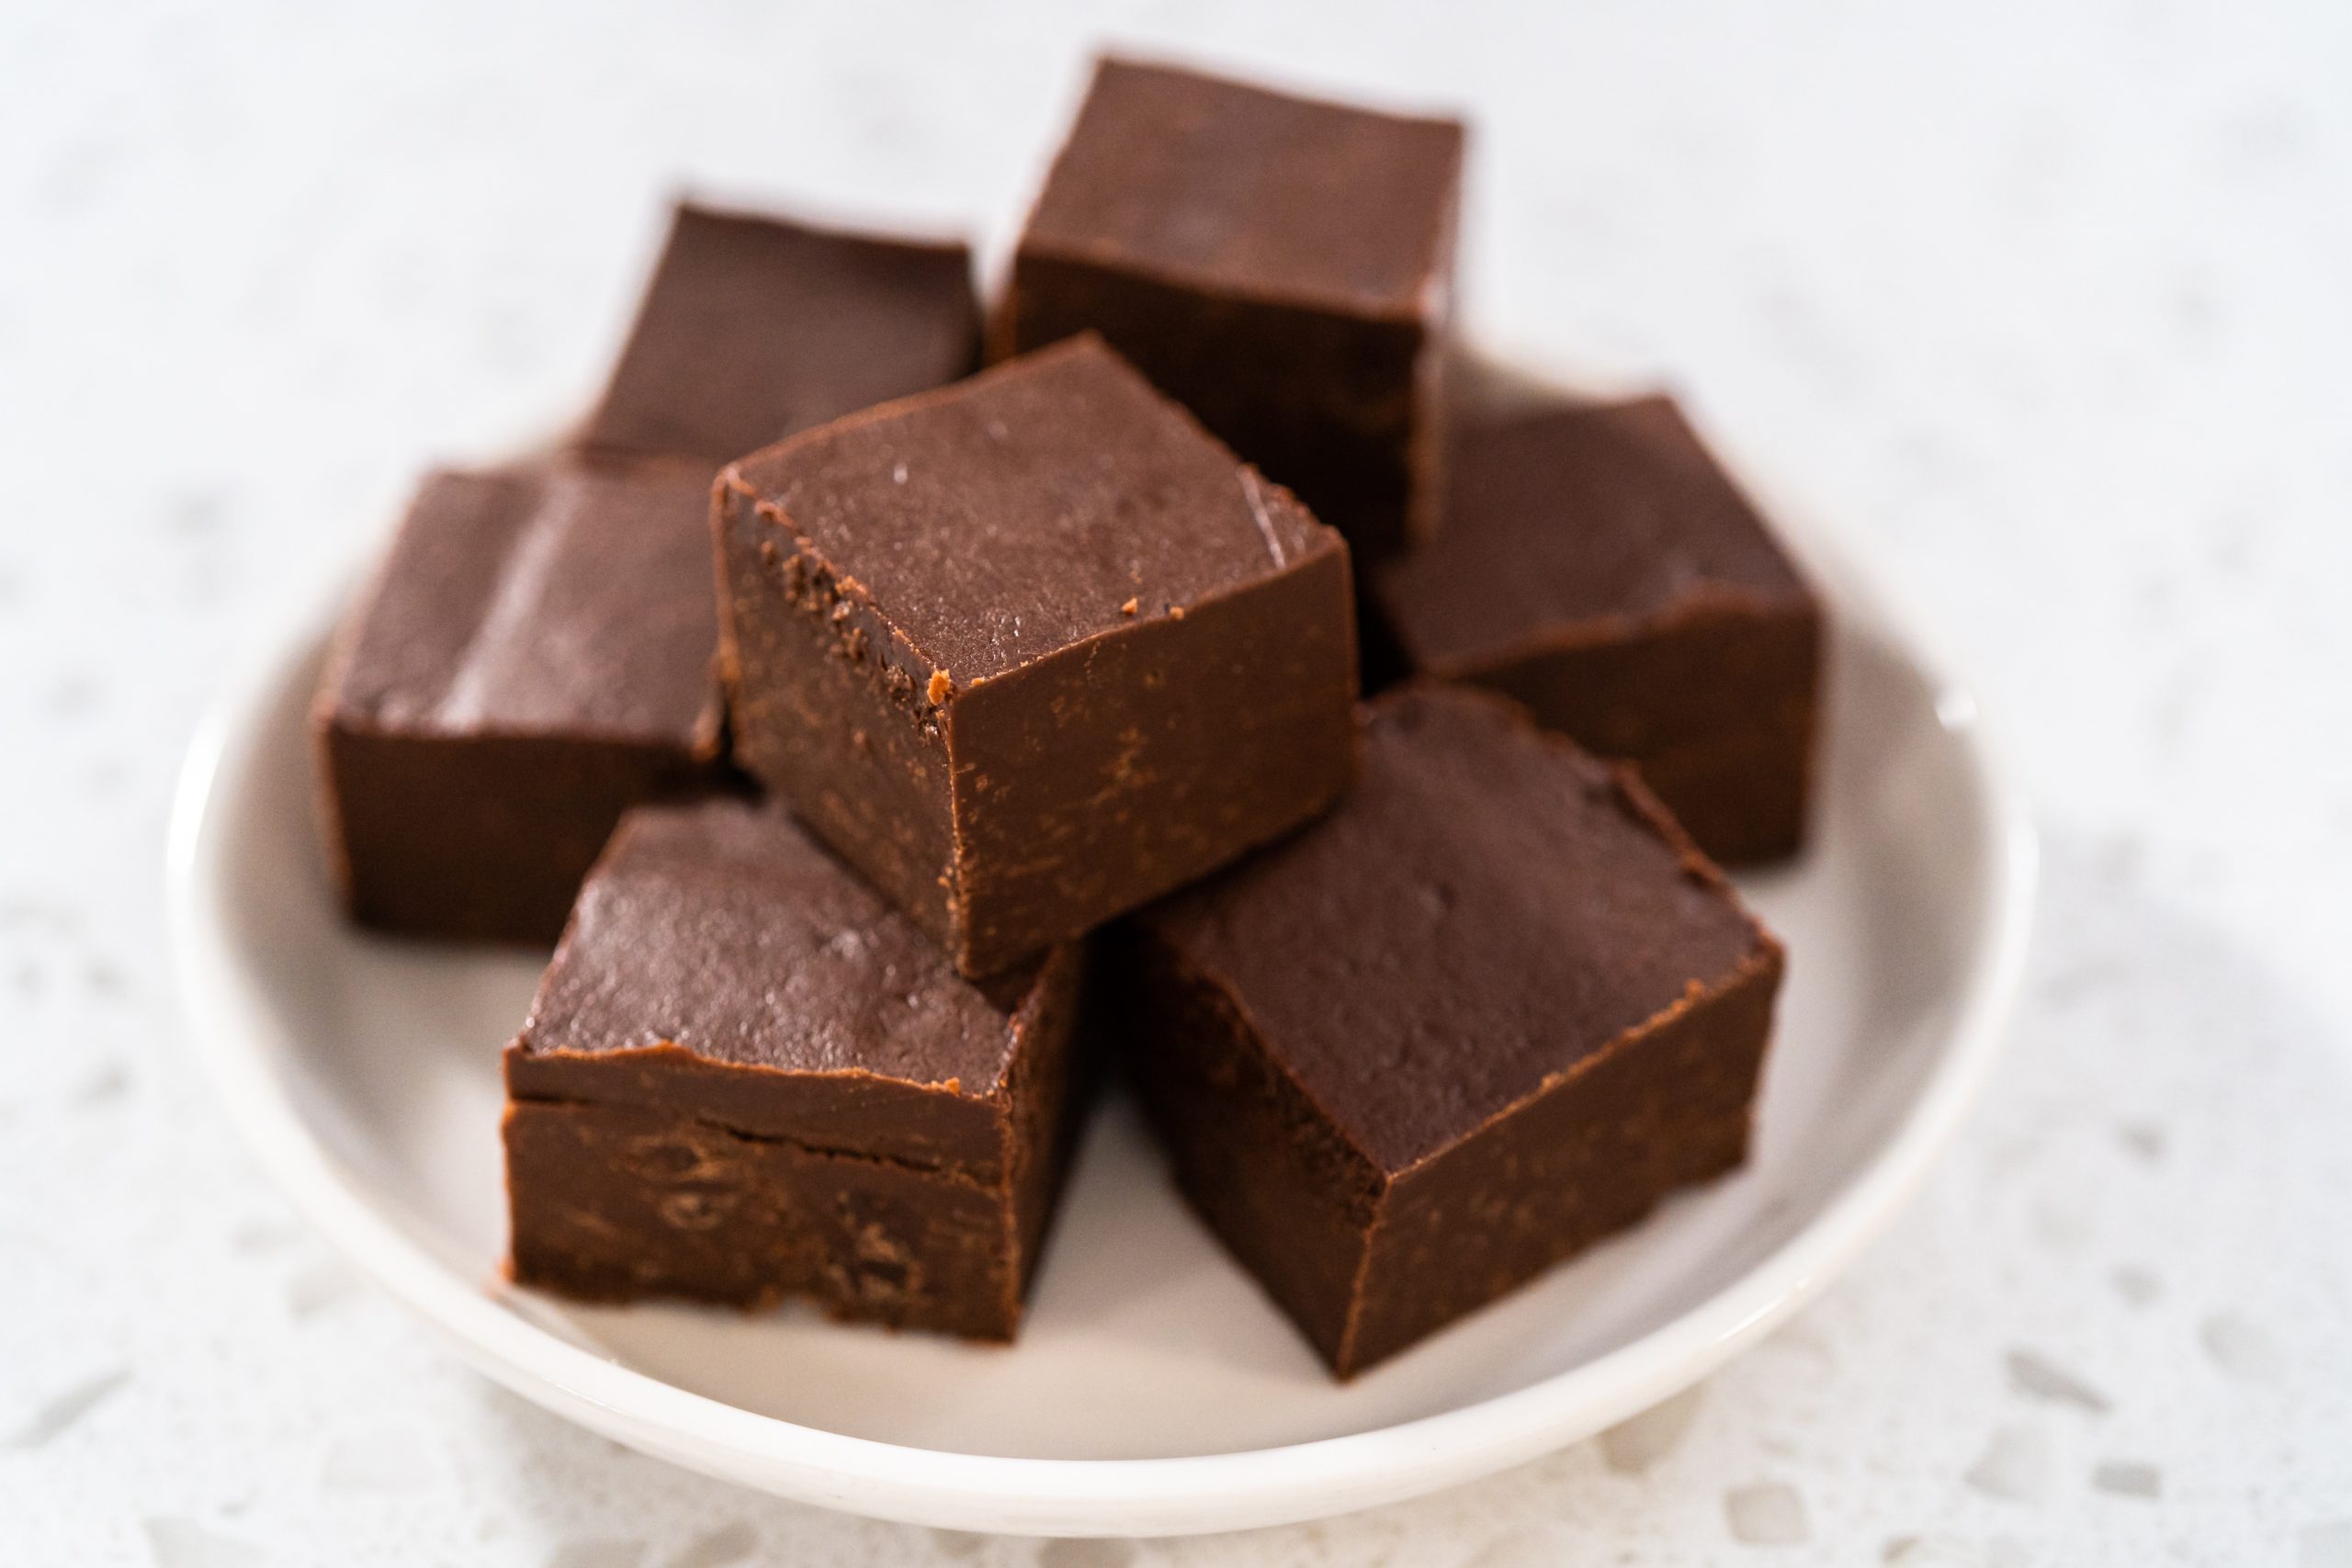 how long is fudge good for?